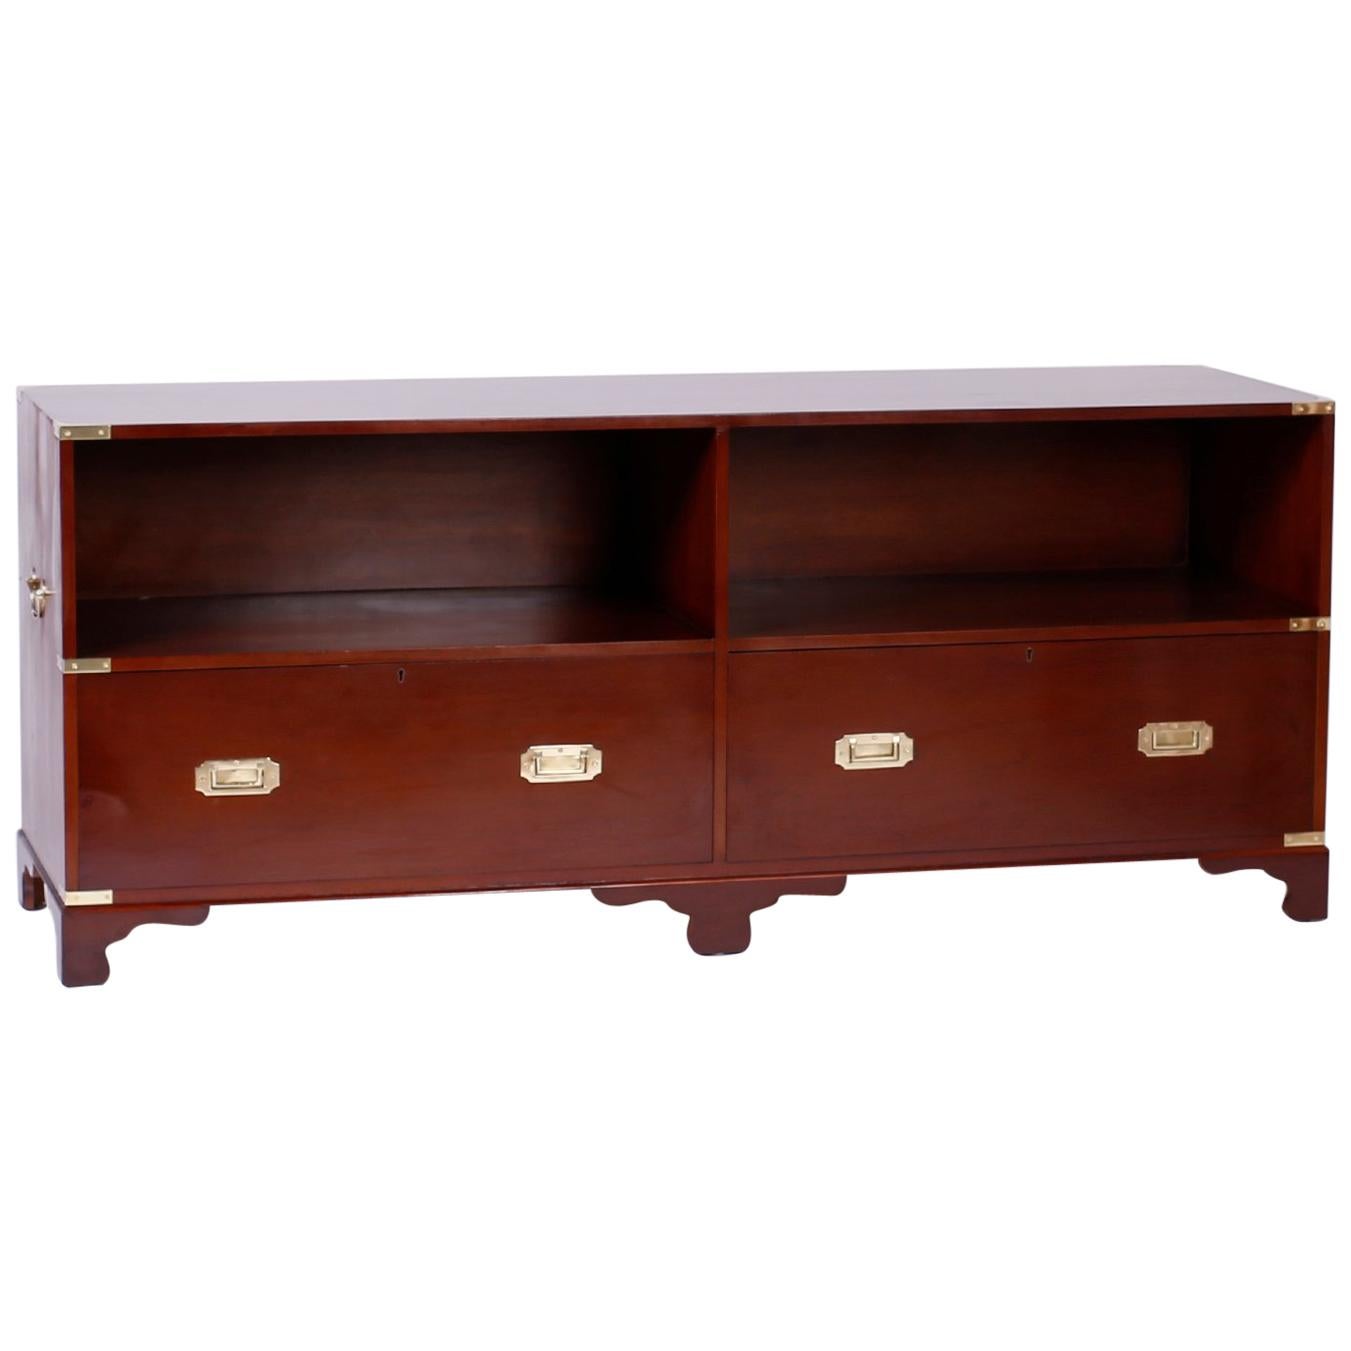 Campaign Style Midcentury Console Bookcase